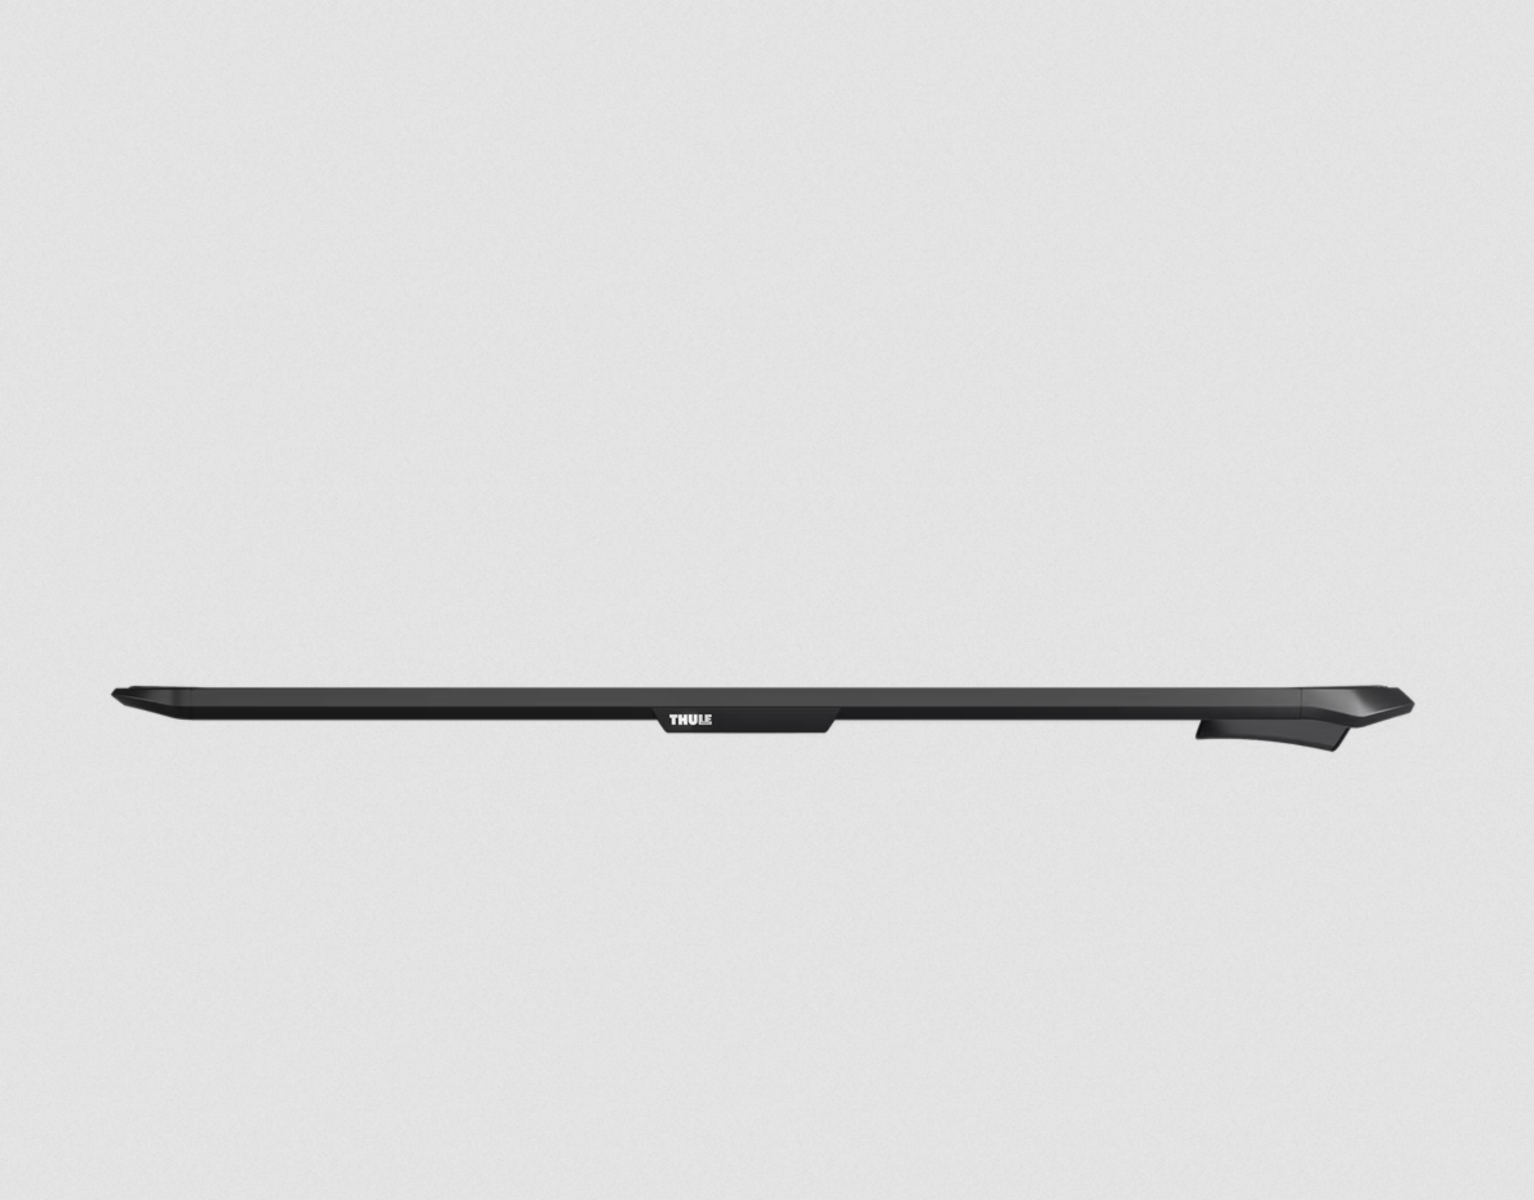 Thule Caprock Platform (1500 x 1330mm) for Honda Accord CP 5dr Wagon with Raised Roof Rail (2008 to 2013) - Raised Rail Mount